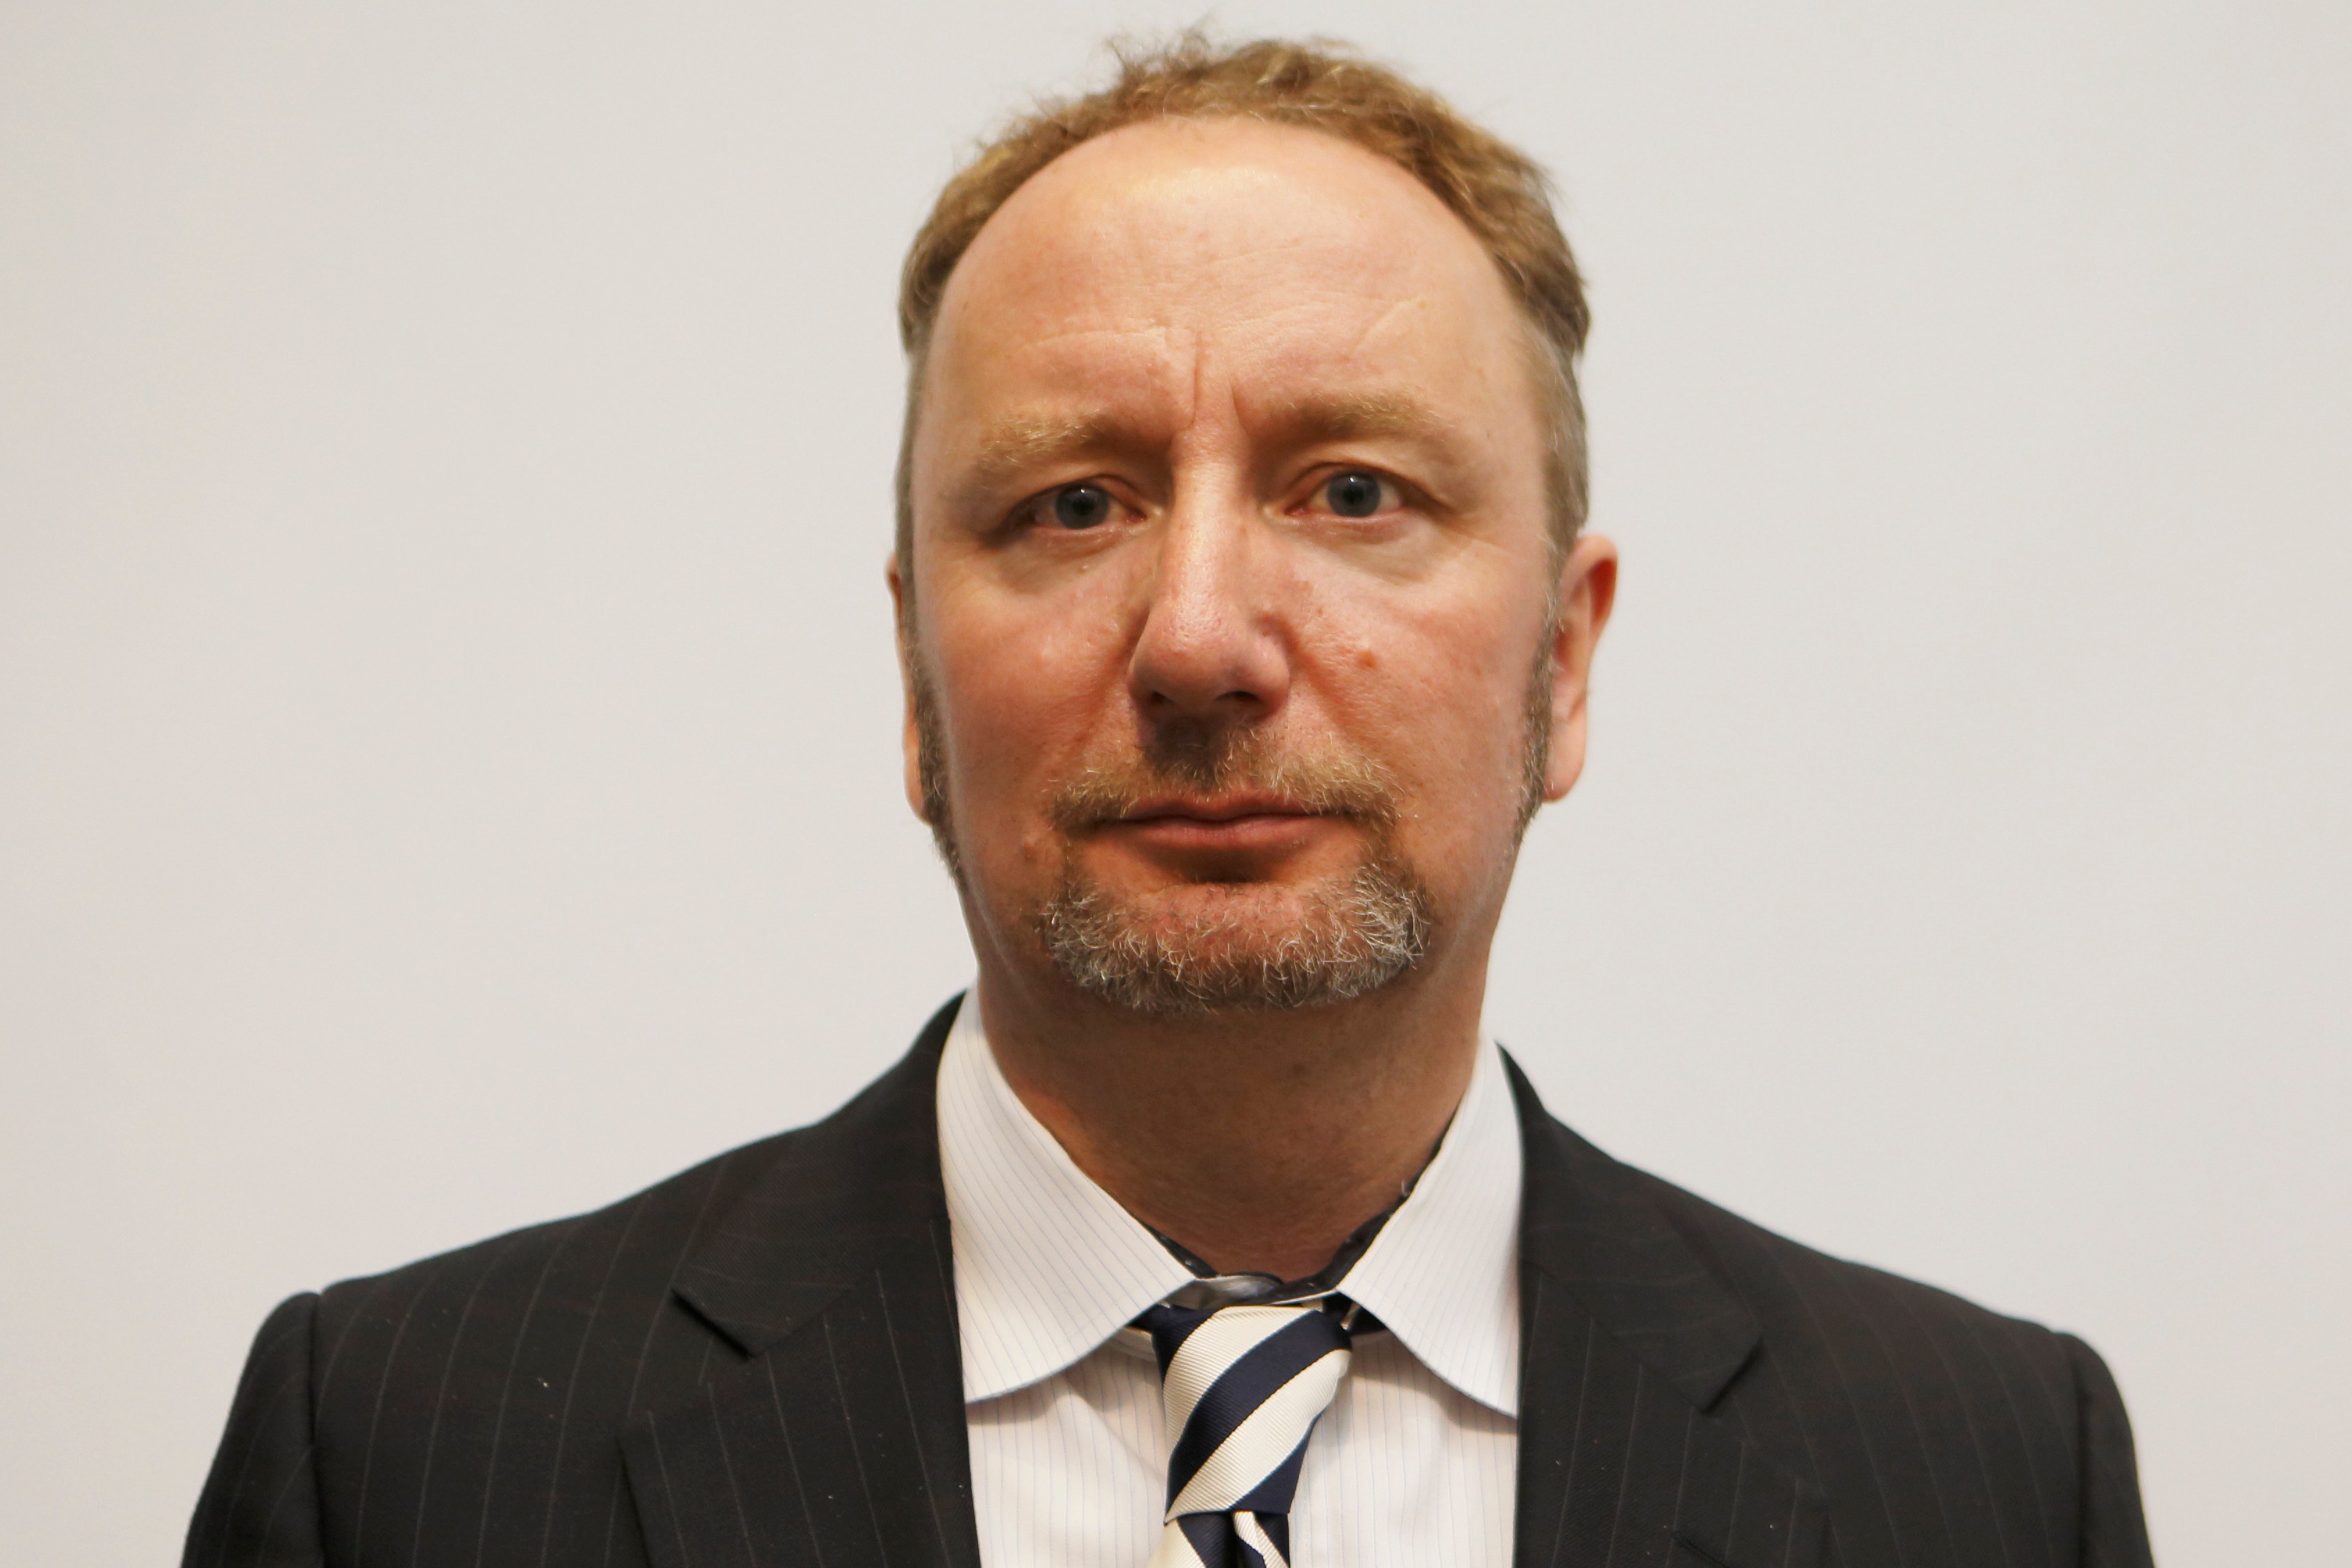 Mark Blyth questioned how Scotland could be compared to successful Scandinavian countries